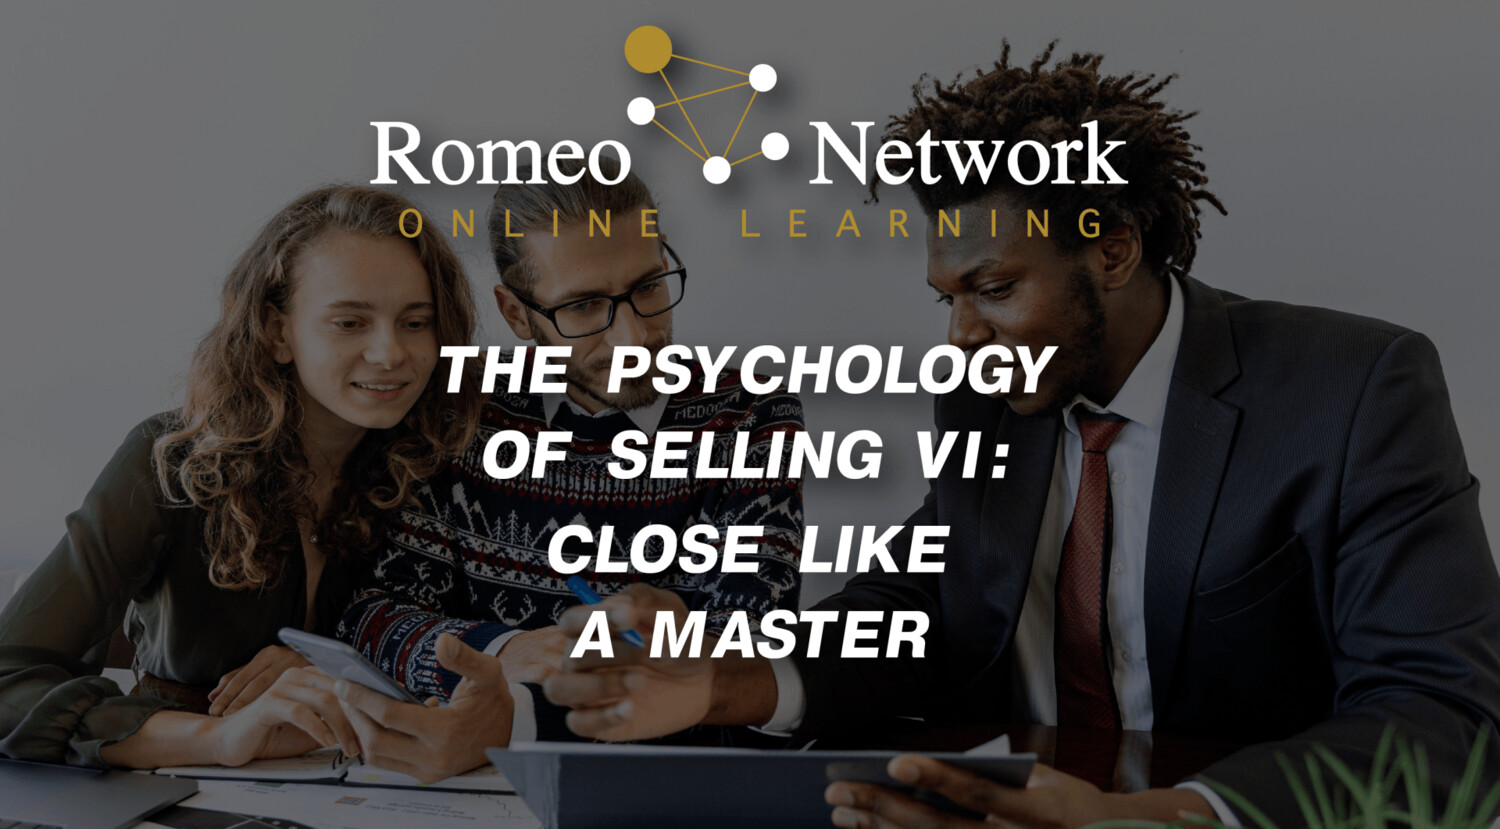 The Psychology of Selling VI: Close Like A Master